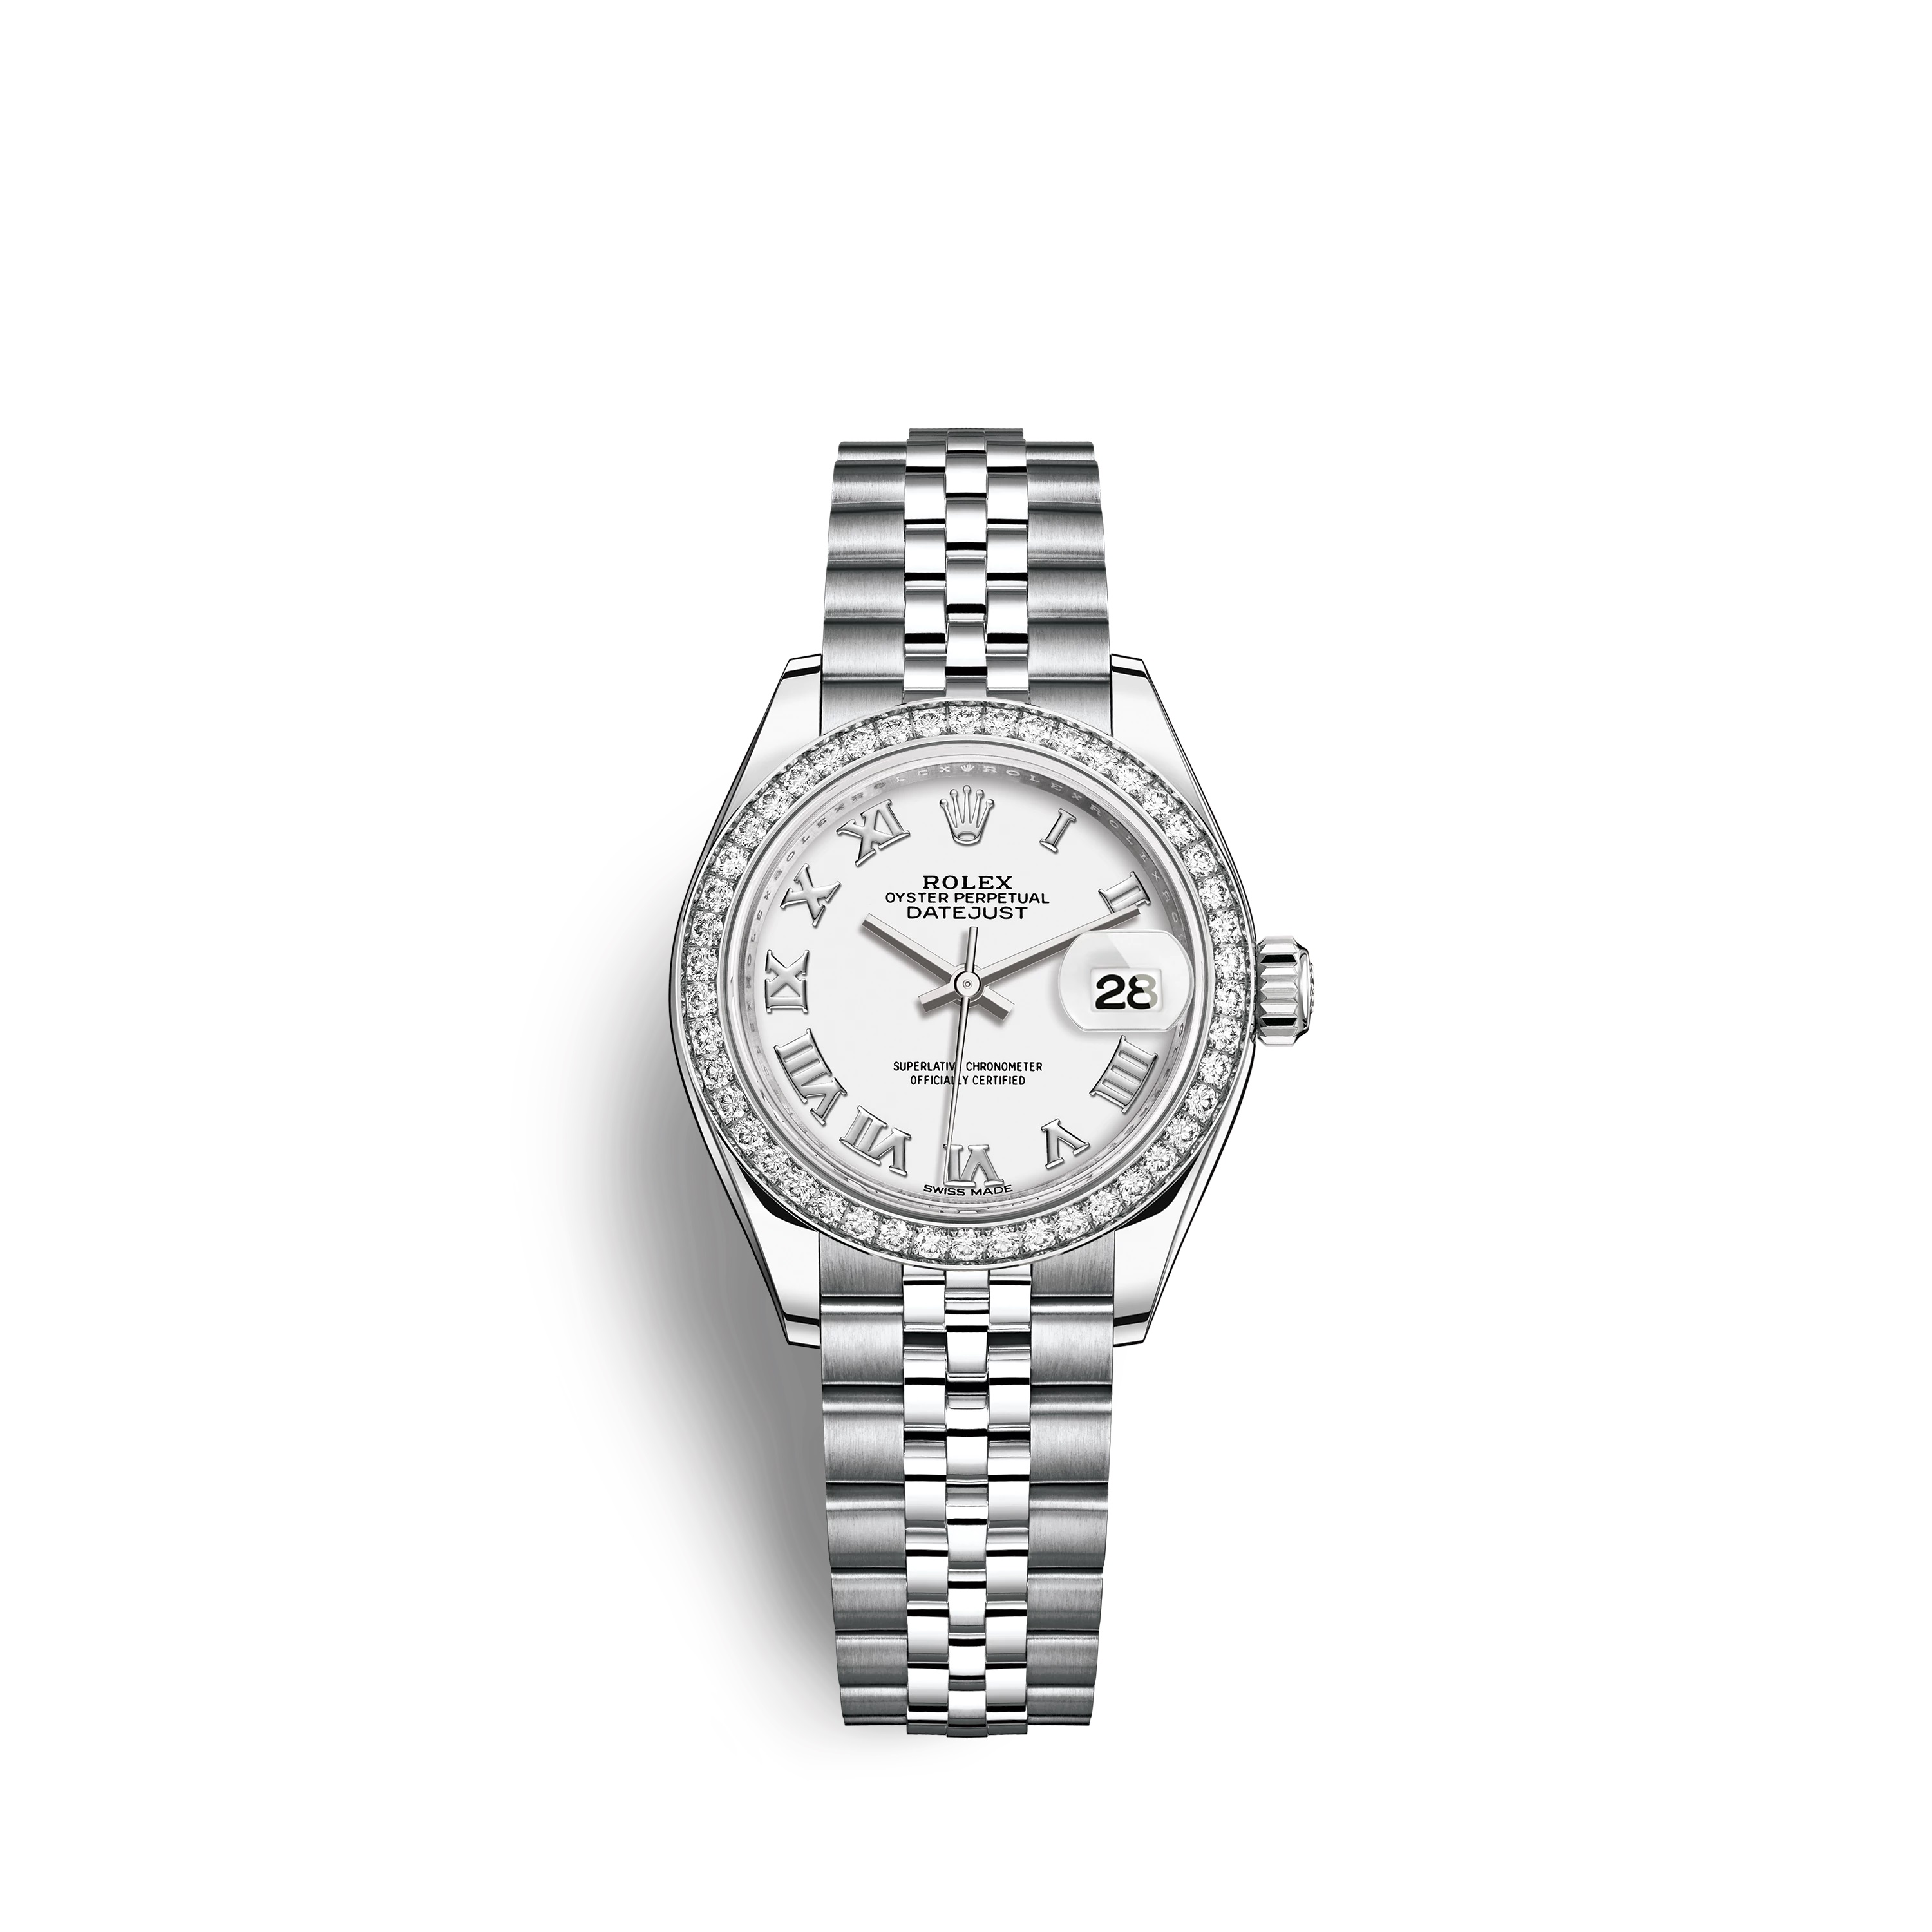 Lady-Datejust 28 279384RBR White Gold &Stainles Steel Watch (White)